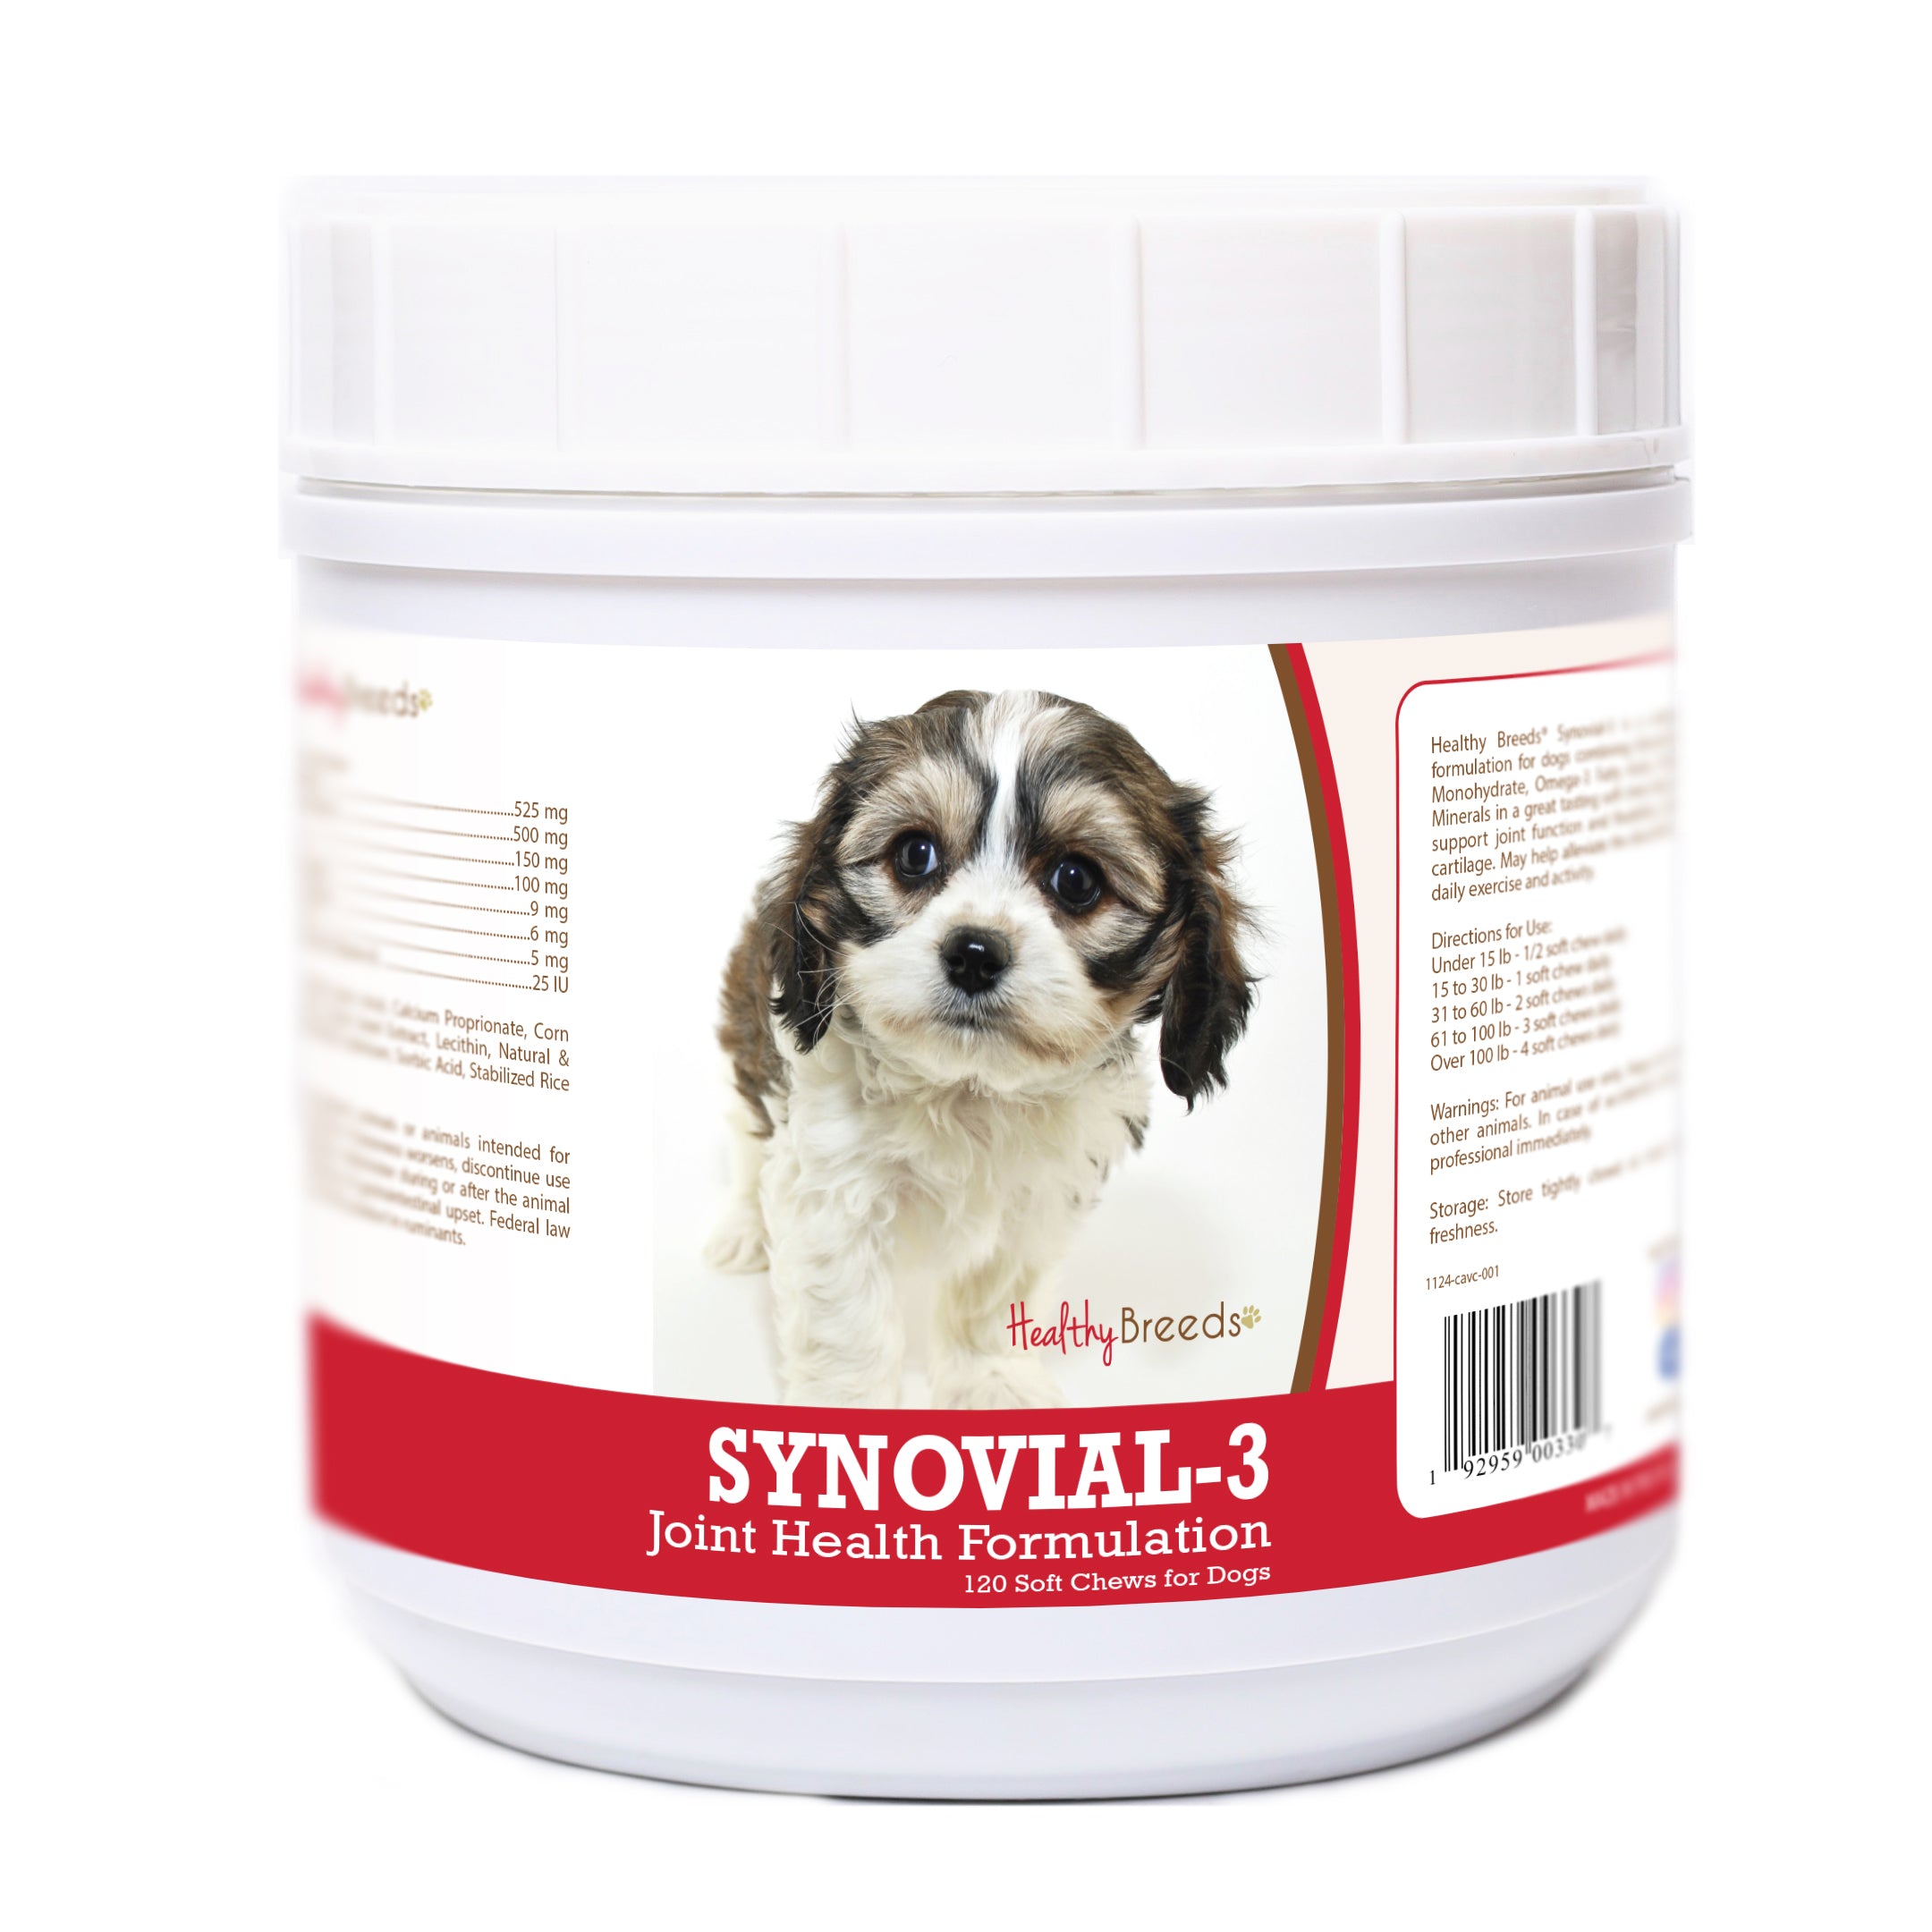 Cavachon Synovial-3 Joint Health Formulation Soft Chews 120 Count